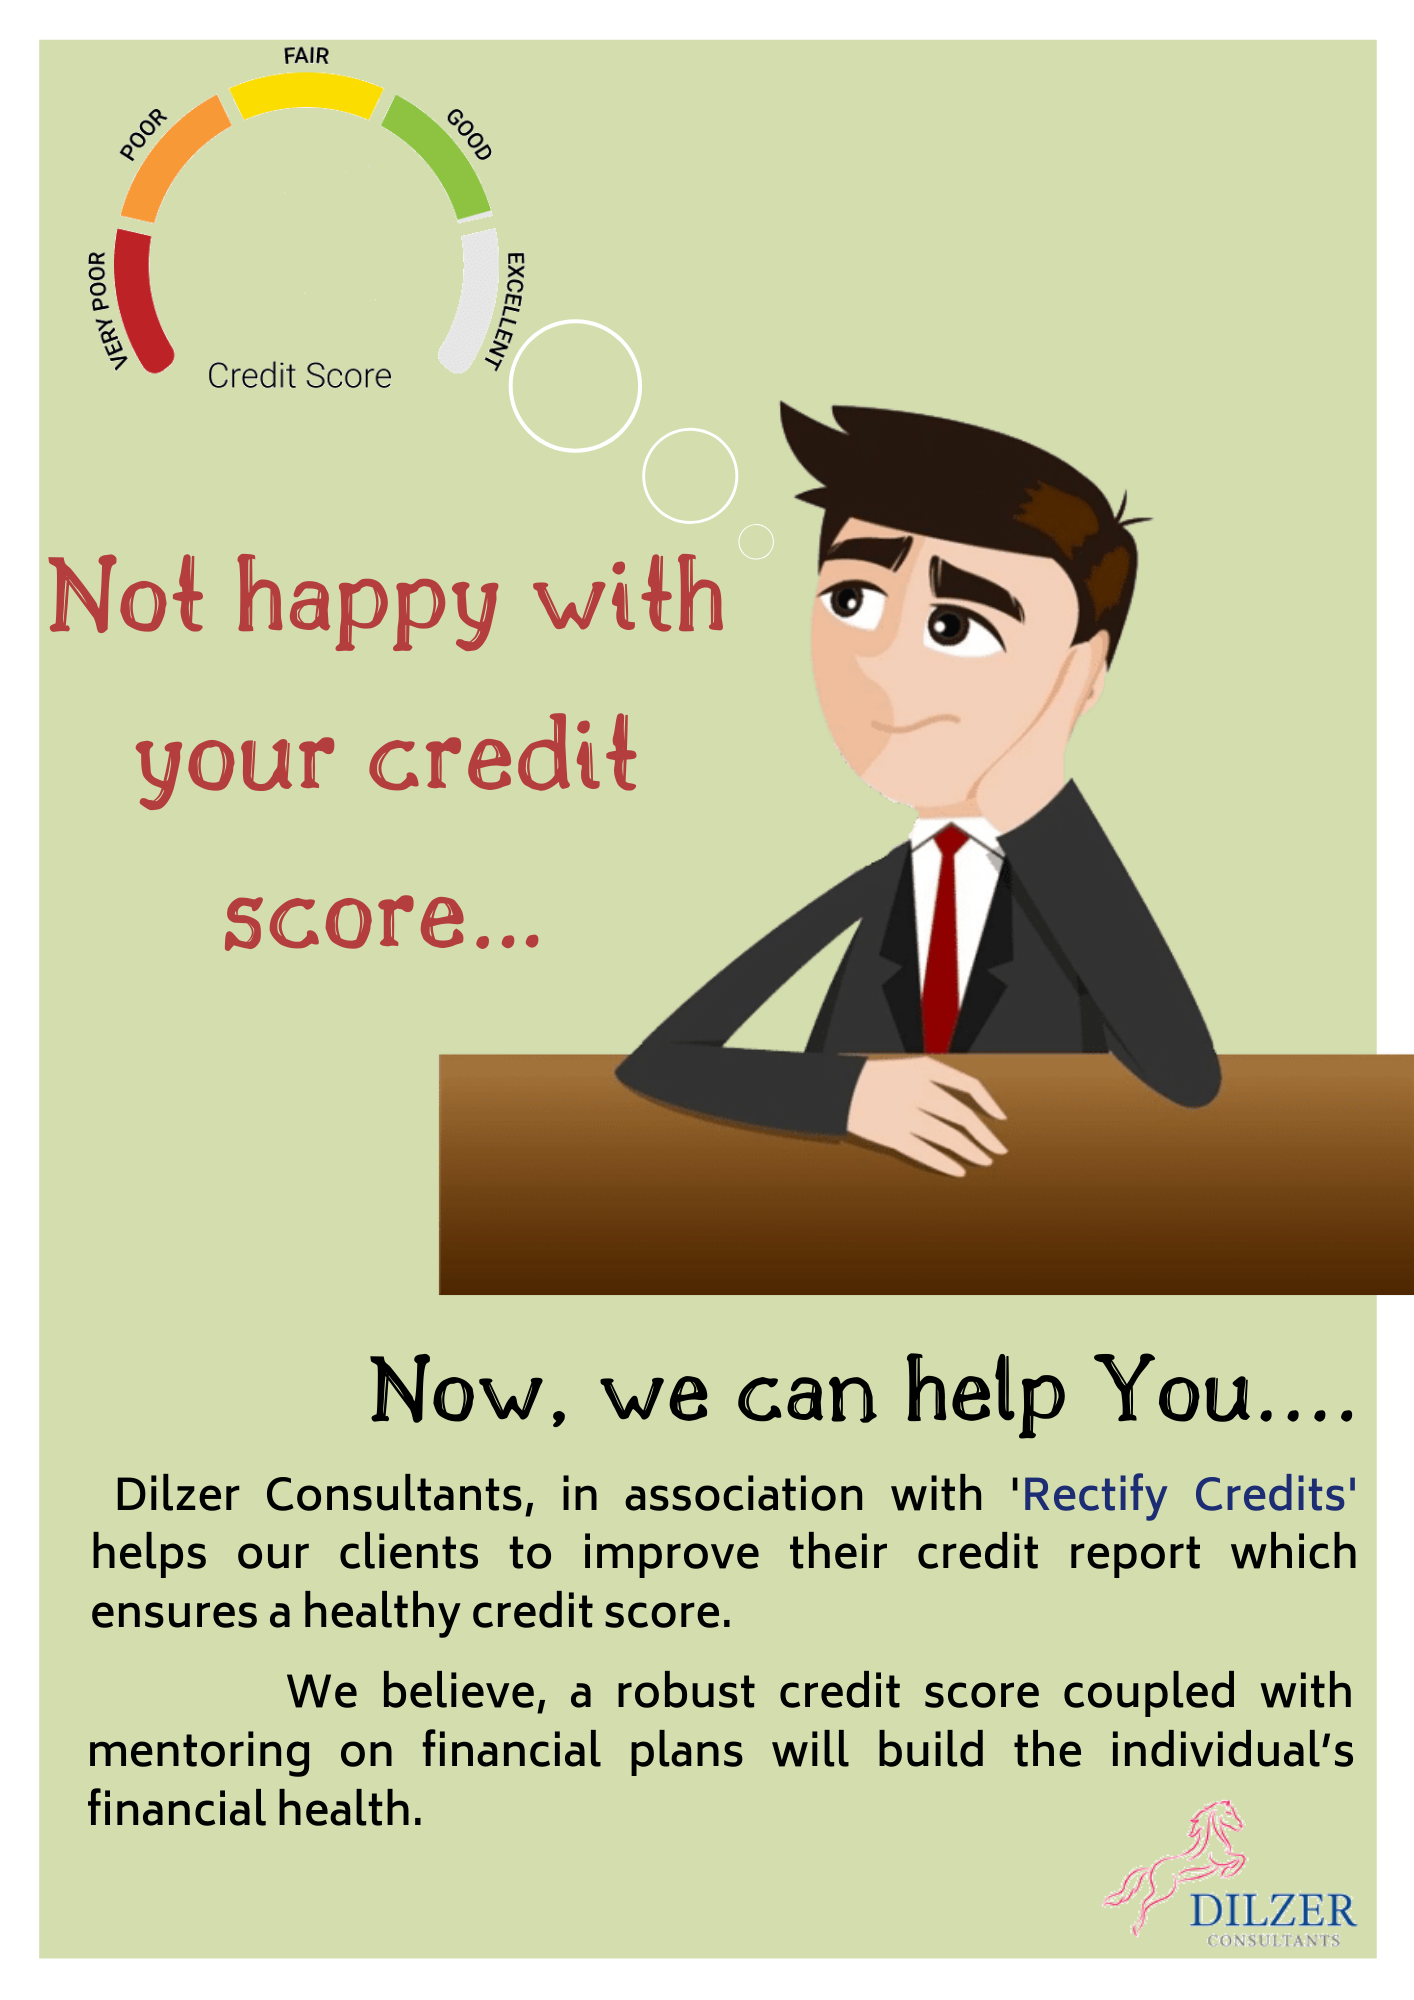 Not happy with your credit score?